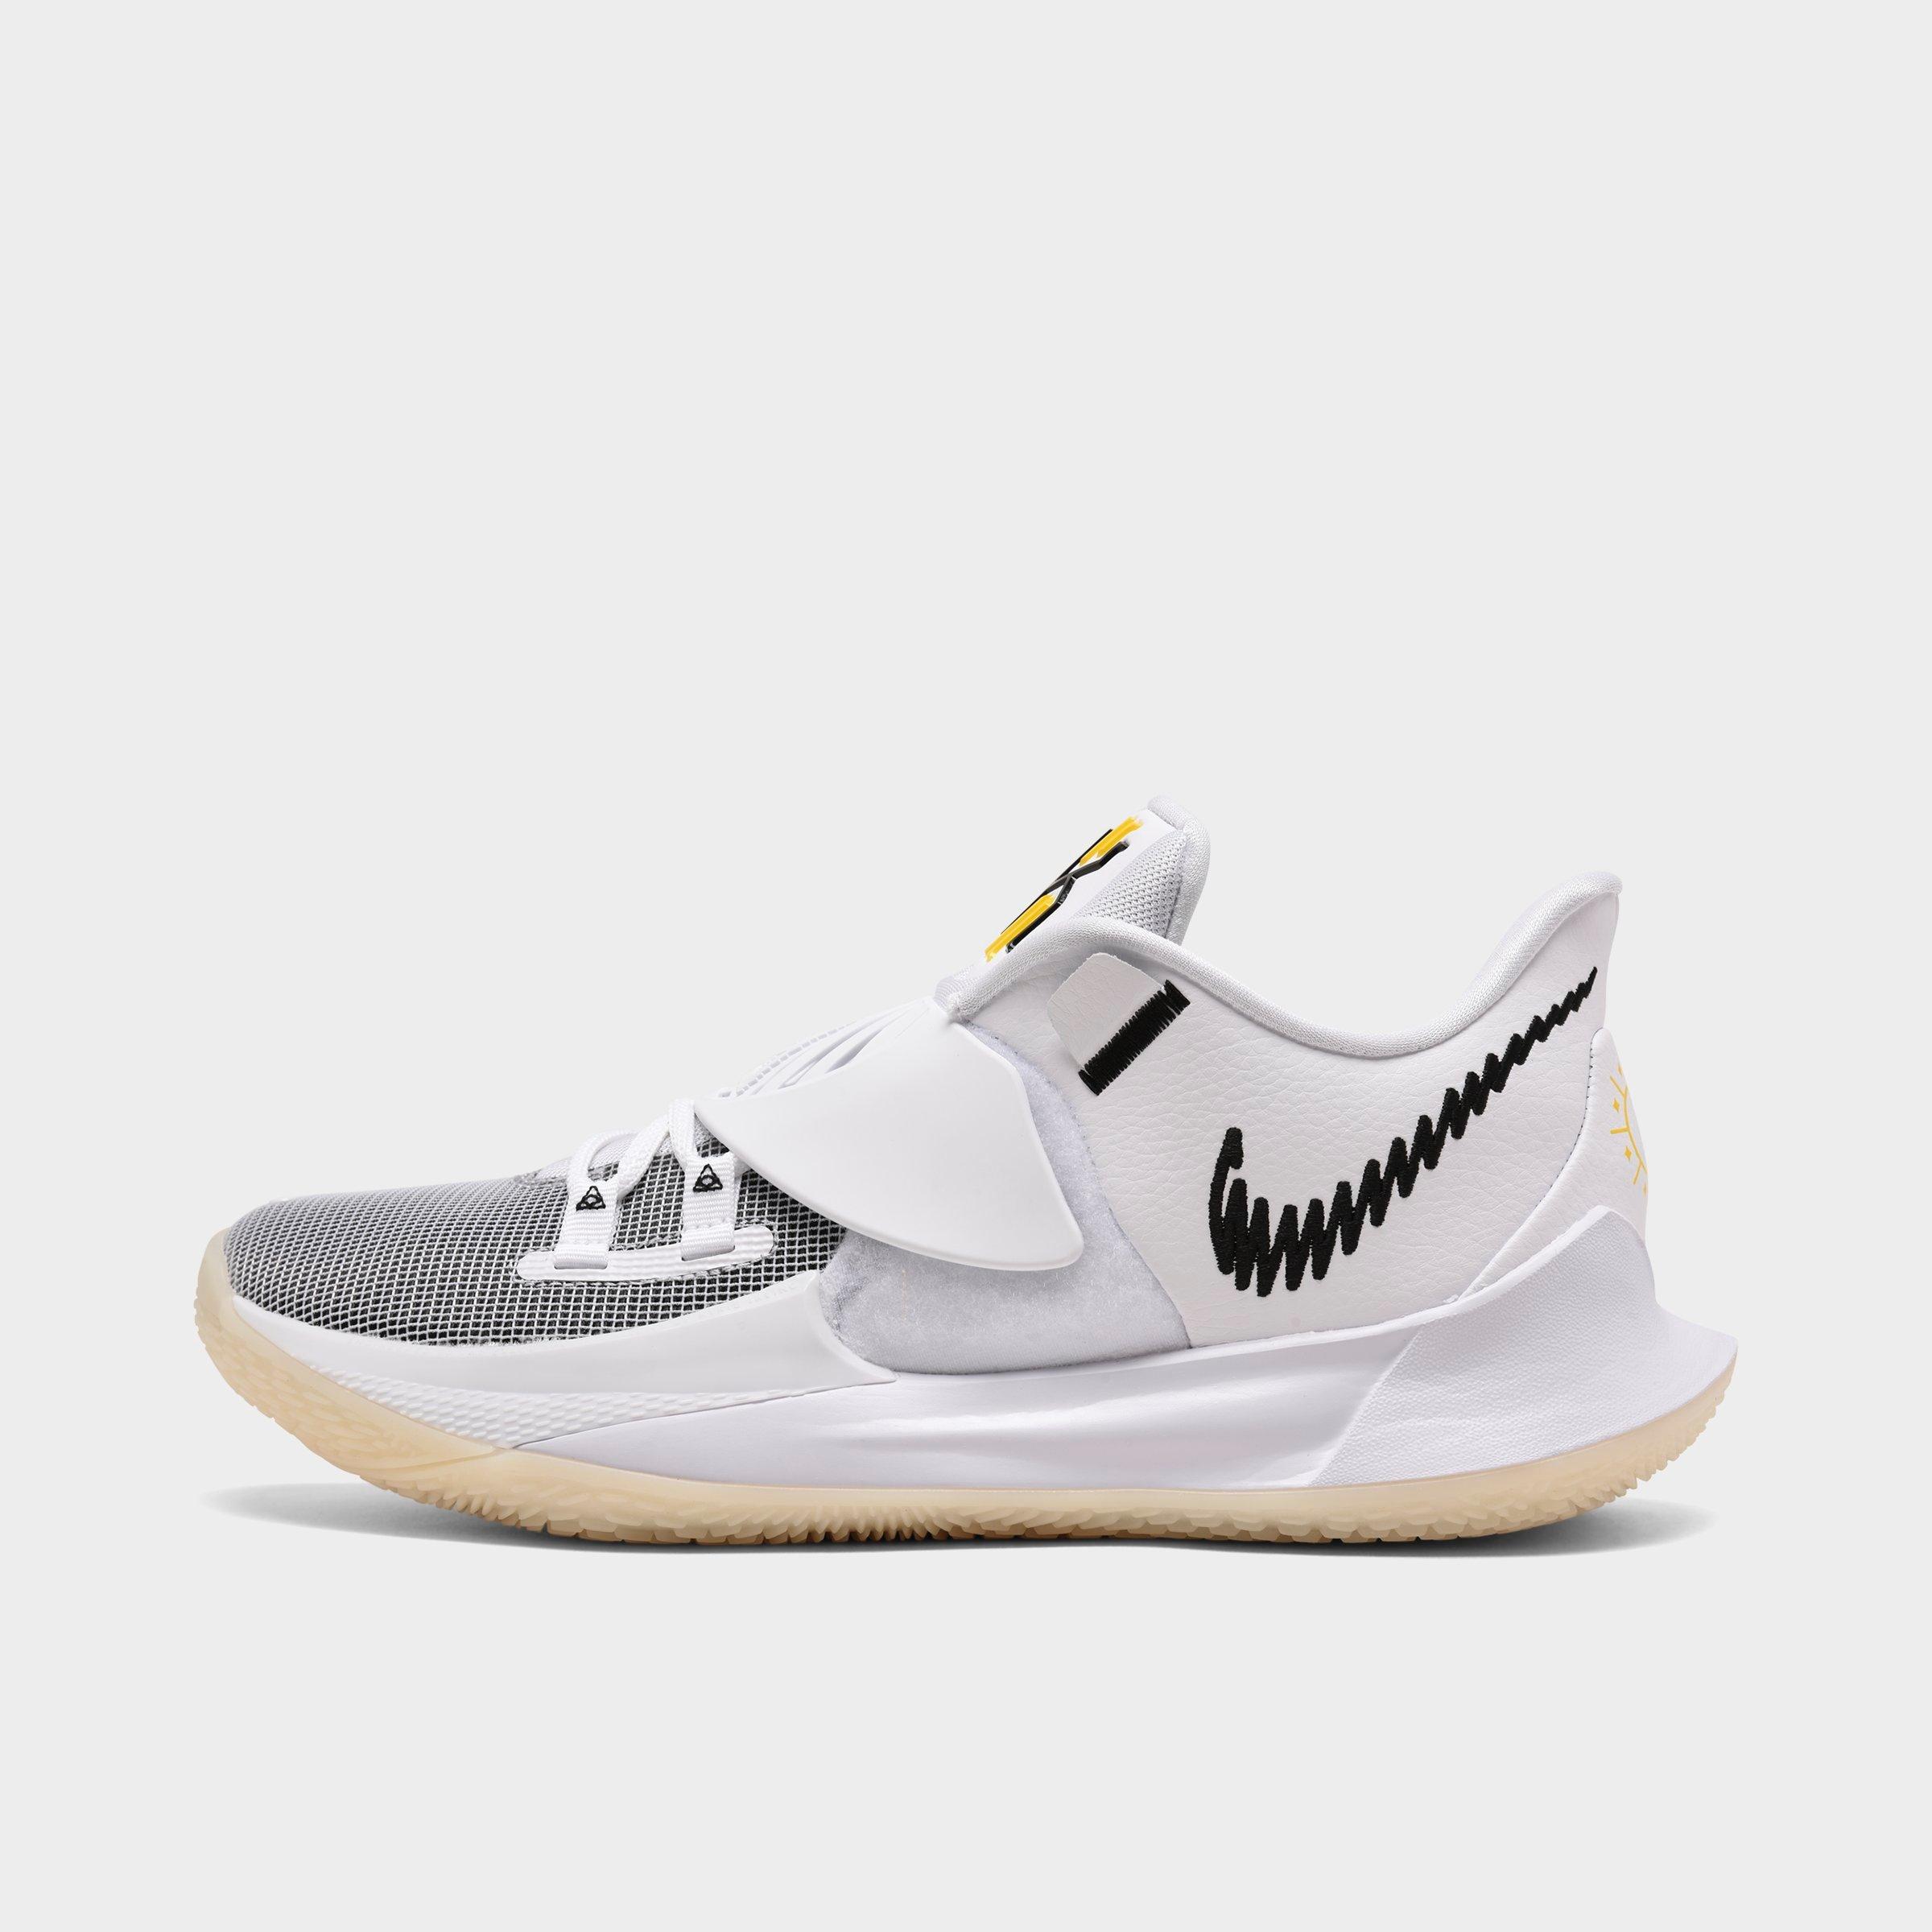 kyrie irving shoes finish line